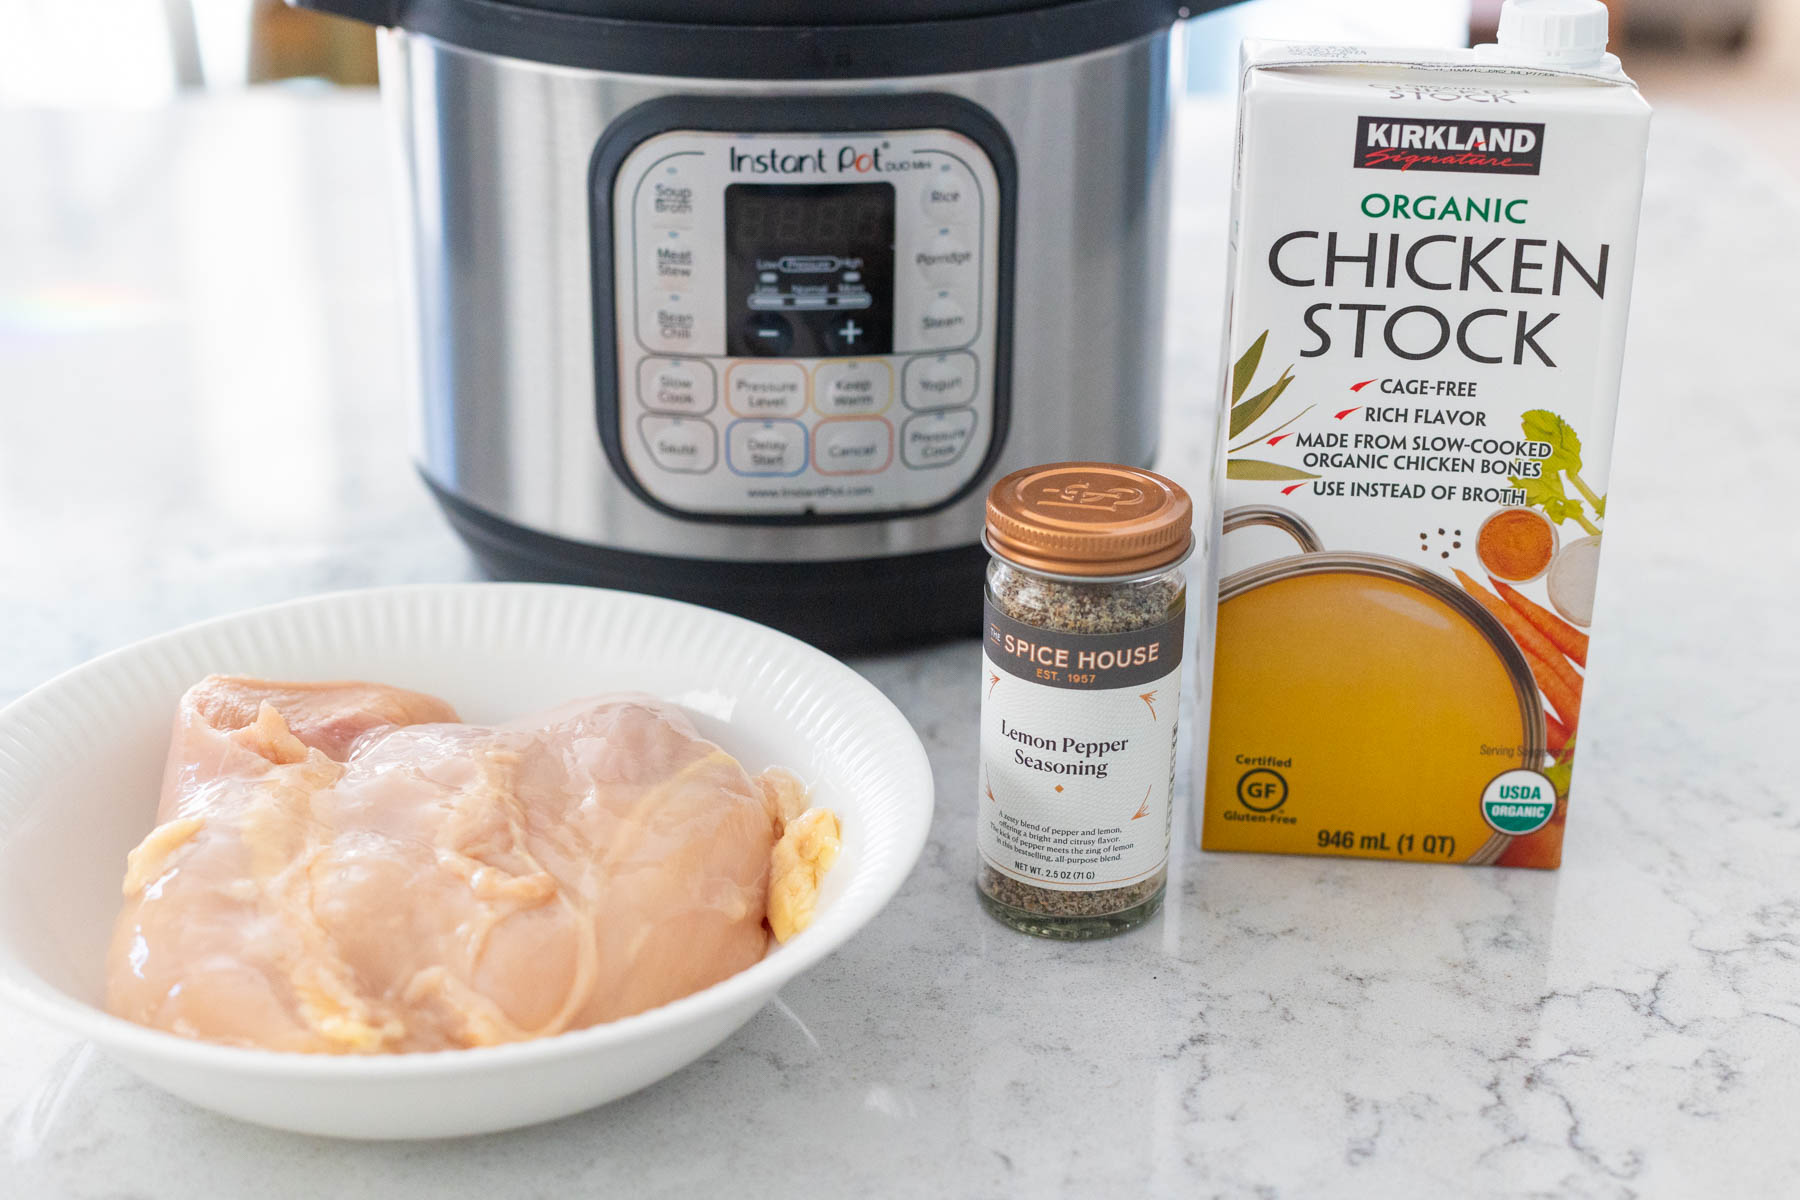 The ingredients to make the shredded chicken are sitting in front of the Instant Pot.